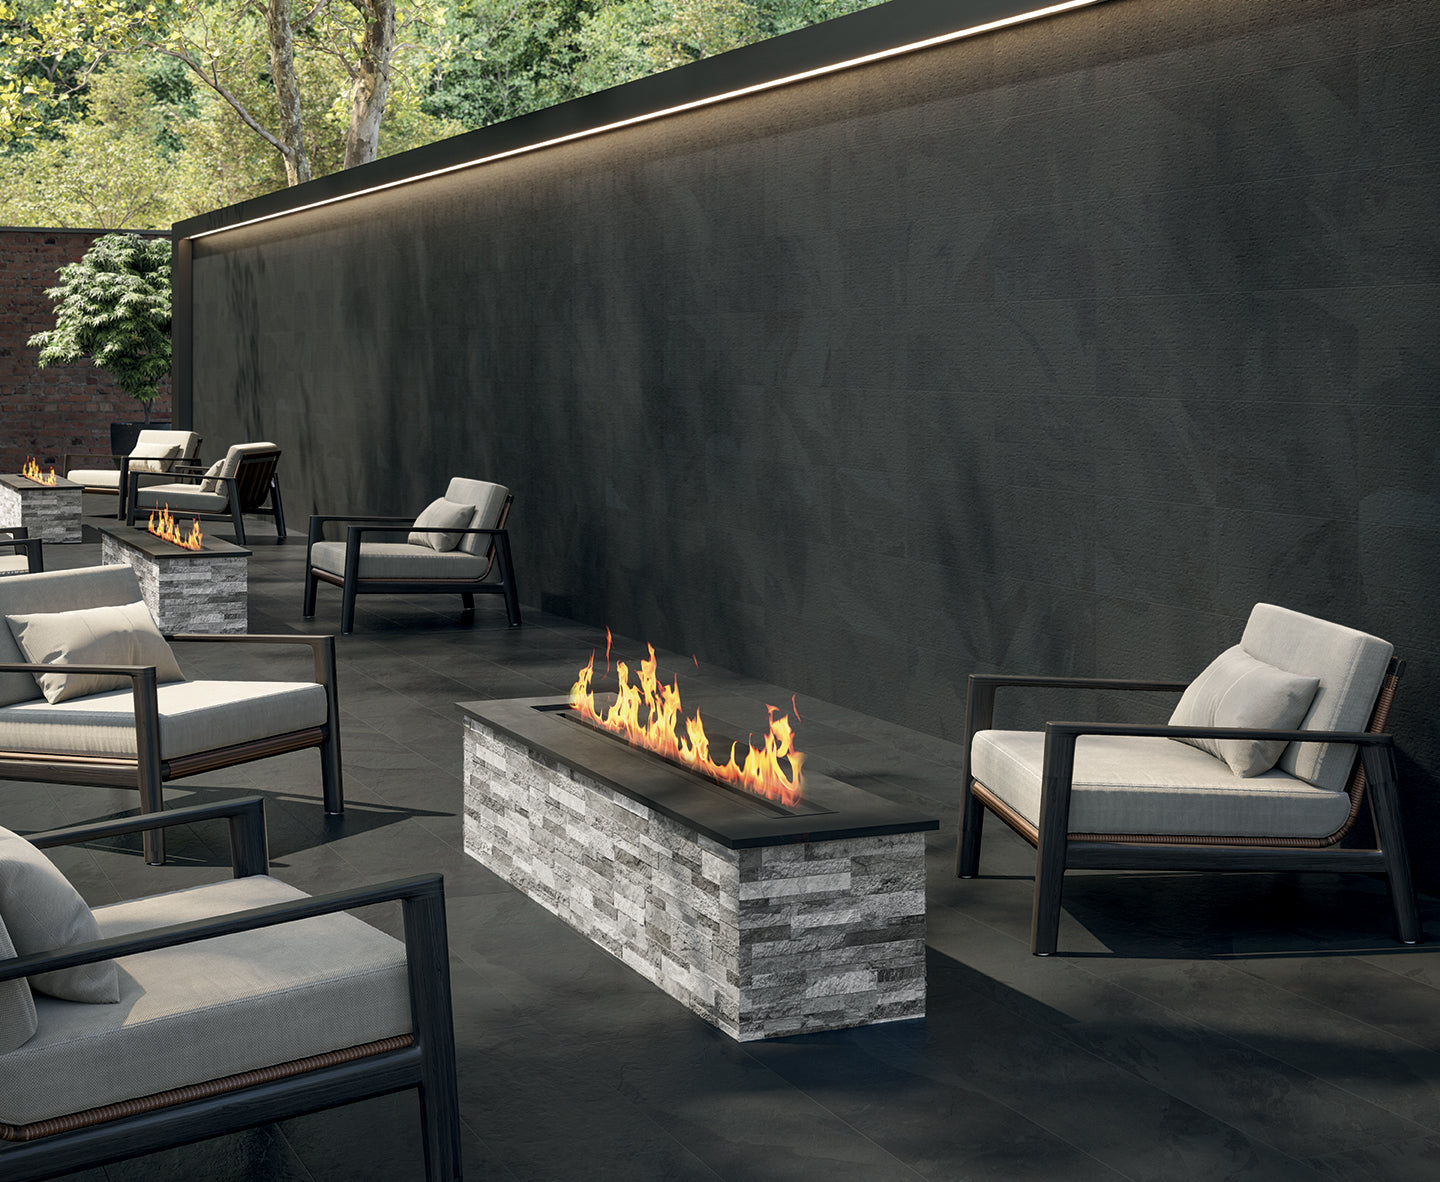 Luxurious porcelain tile collection from Surface Group featuring textured black tiles in an elegant outdoor patio setting with modern furniture and a fire feature.